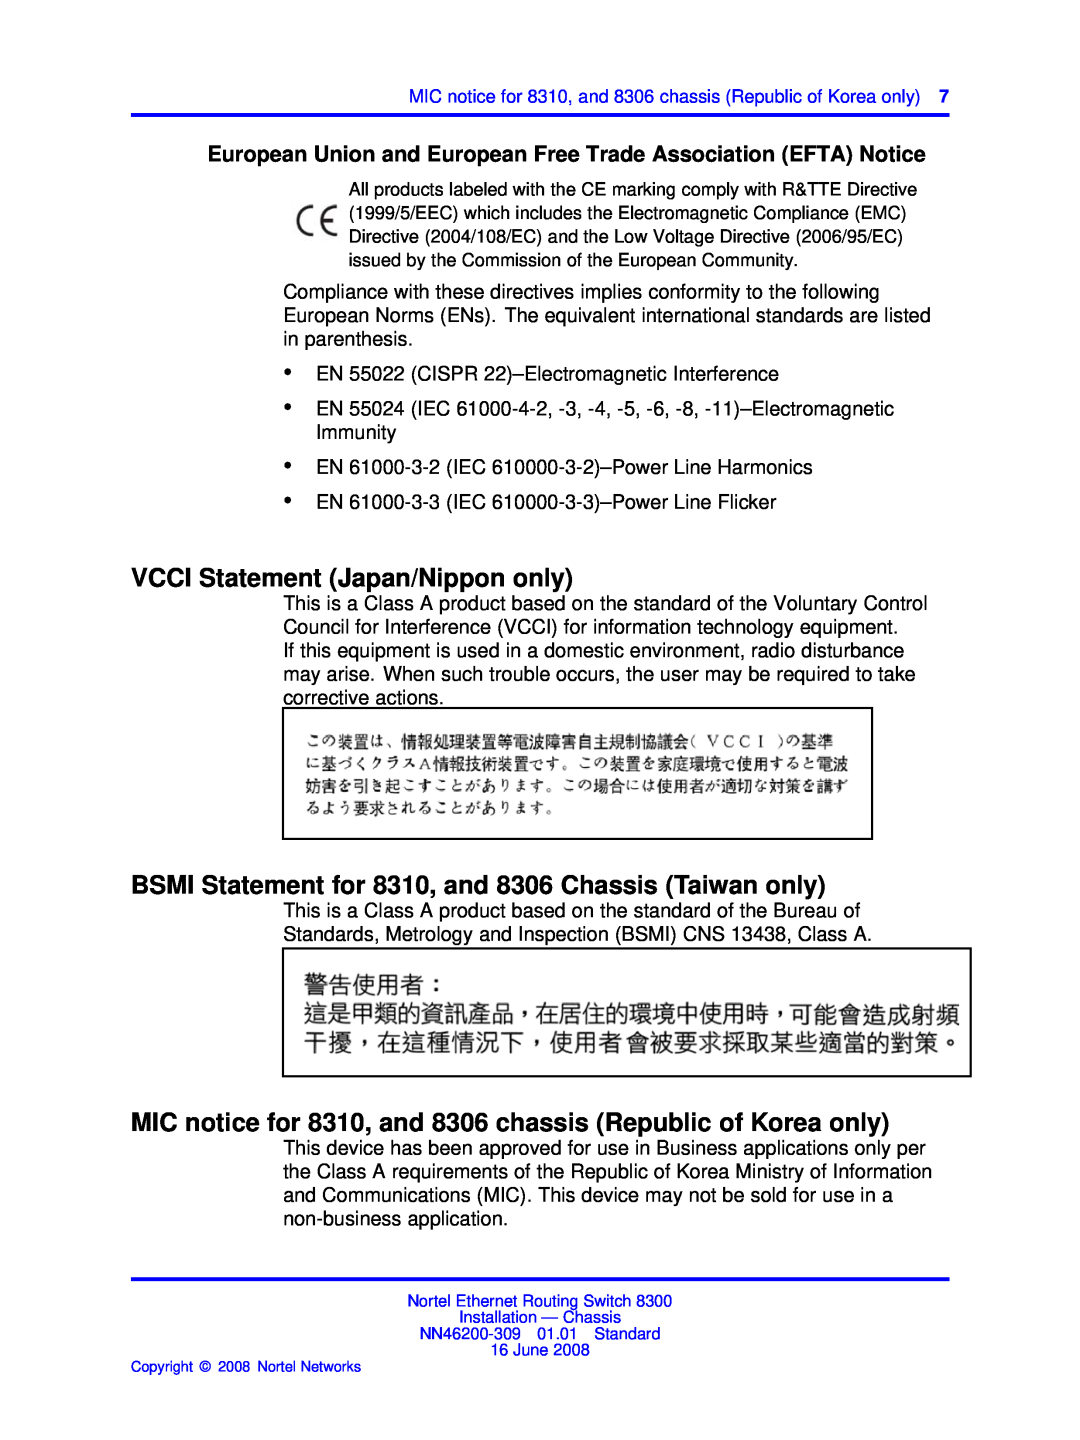 Nortel Networks manual VCCI Statement Japan/Nippon only, BSMI Statement for 8310, and 8306 Chassis Taiwan only 